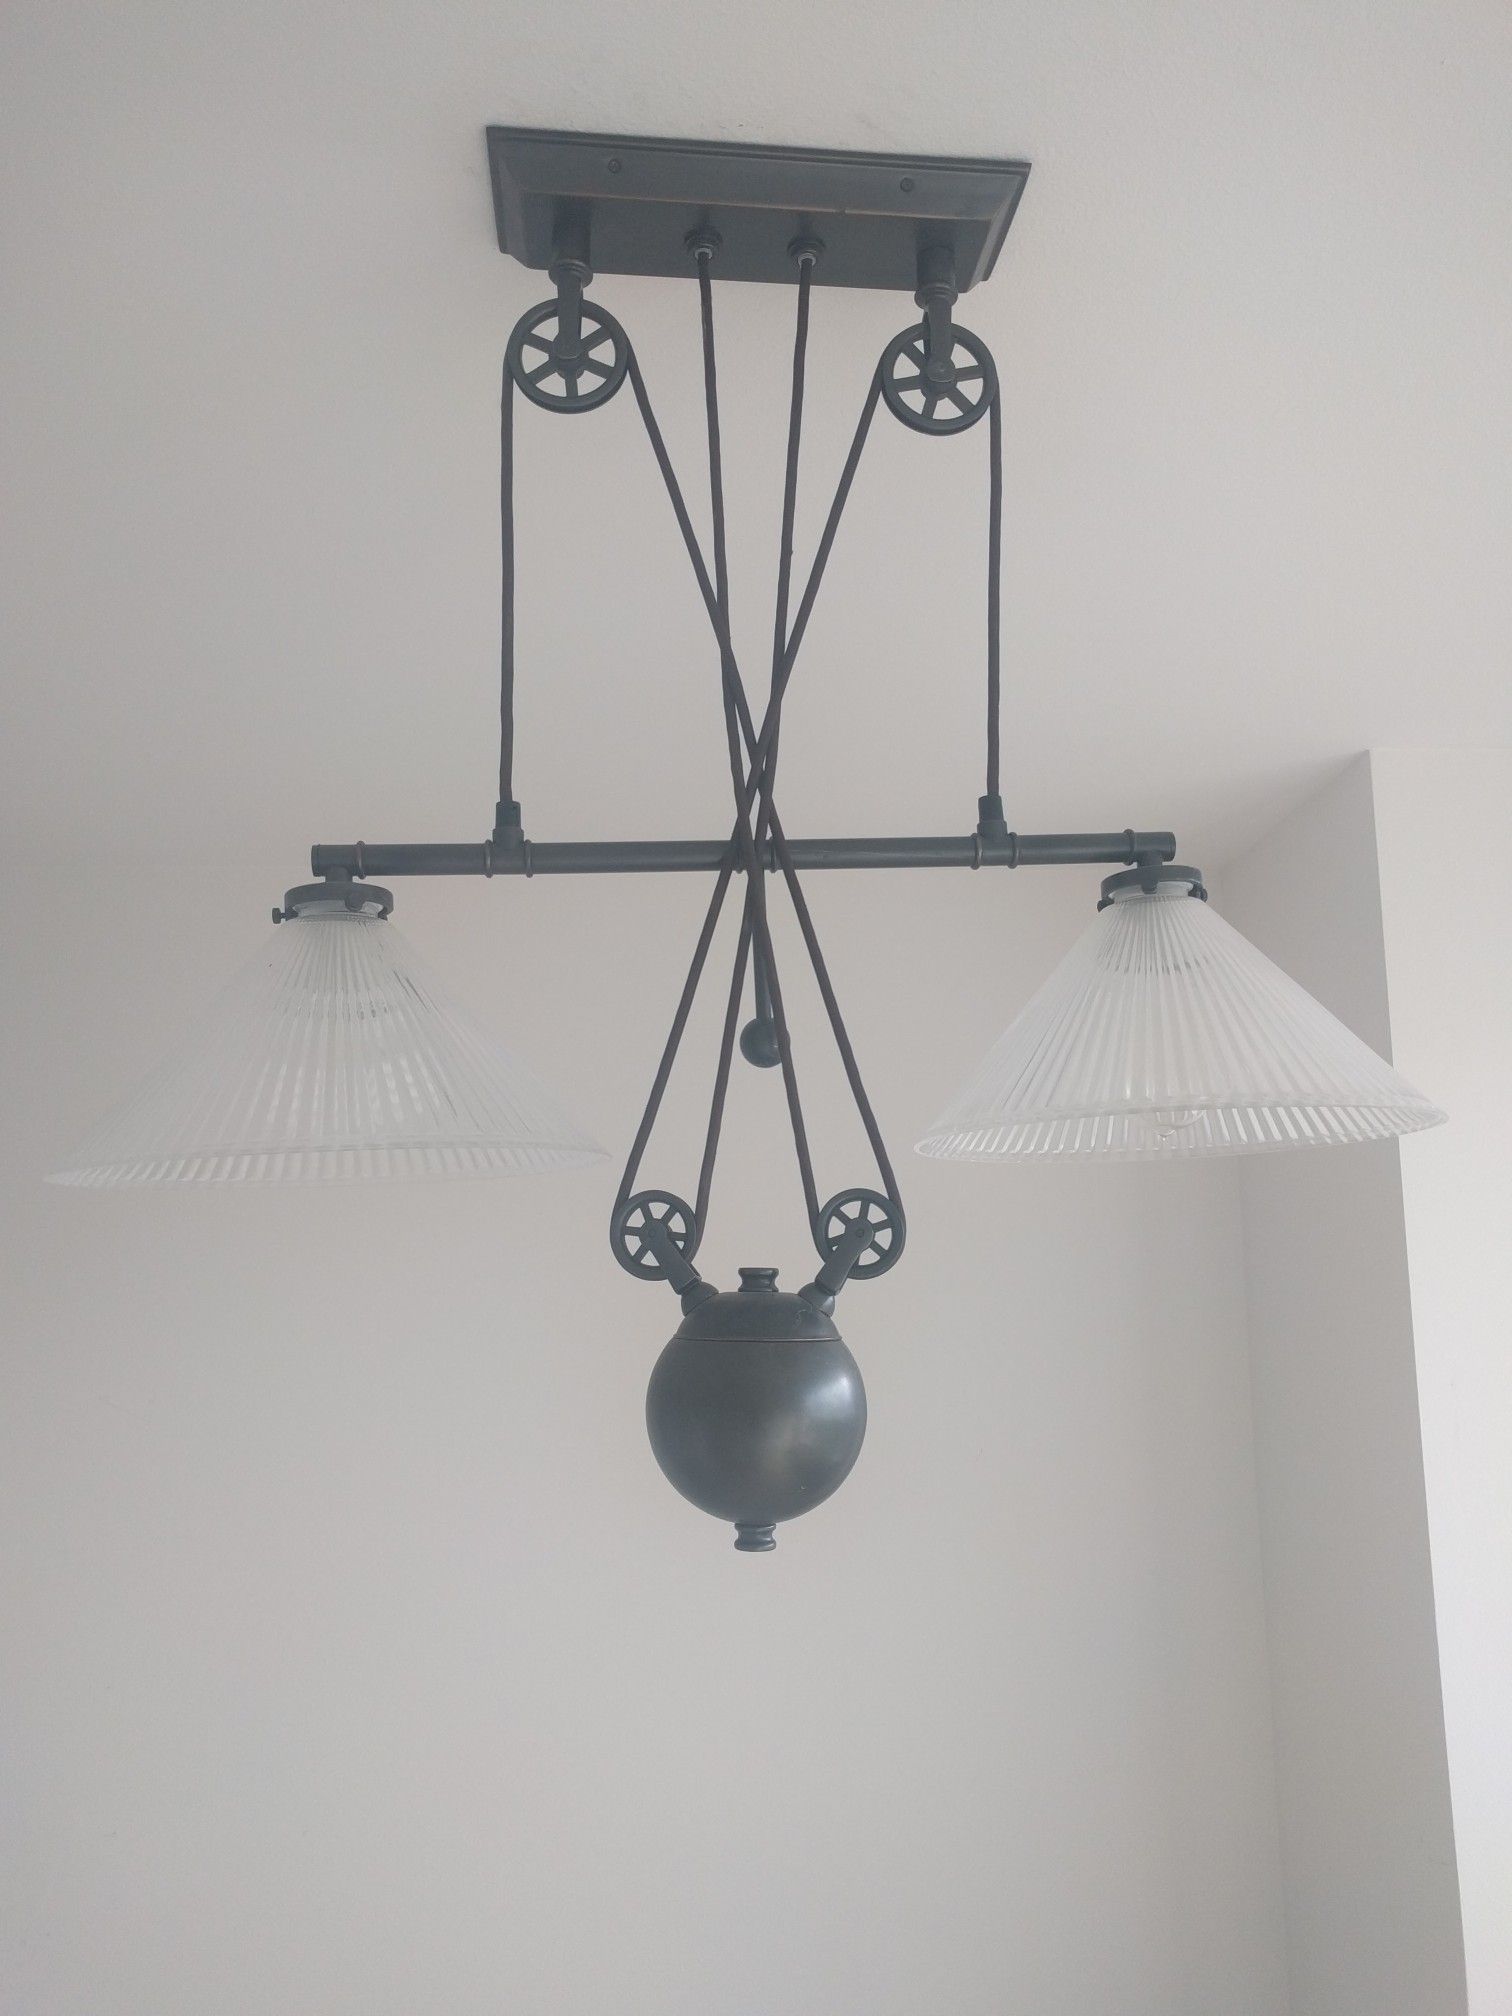 Restoration Hardware Pulley Double Pendent Light Fixture